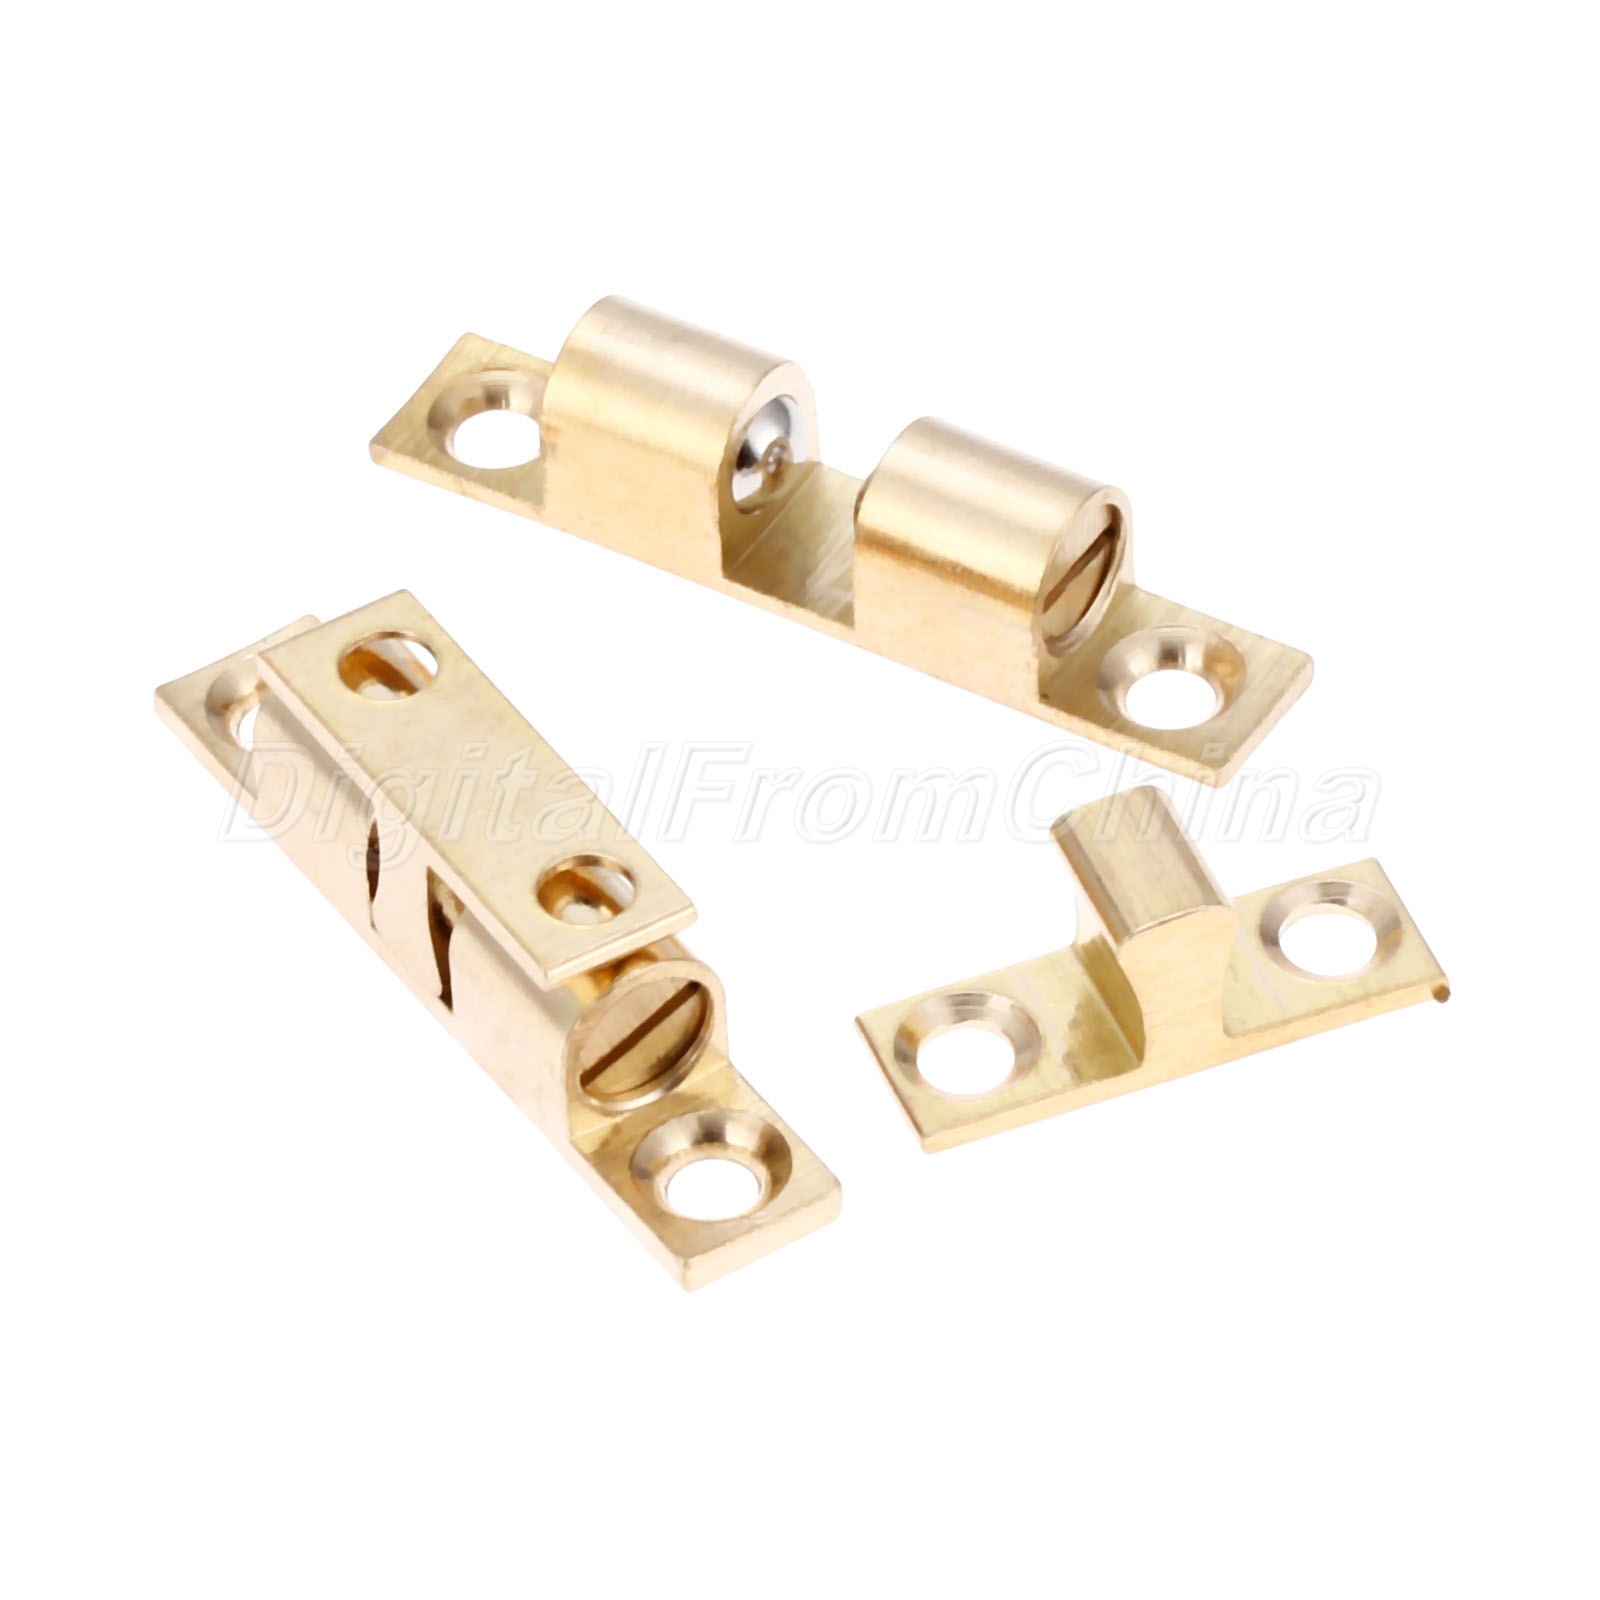 Brass Tone Drawer Cabinet Door Latch Clip Lock Durable Ball Touch Catches 42mm